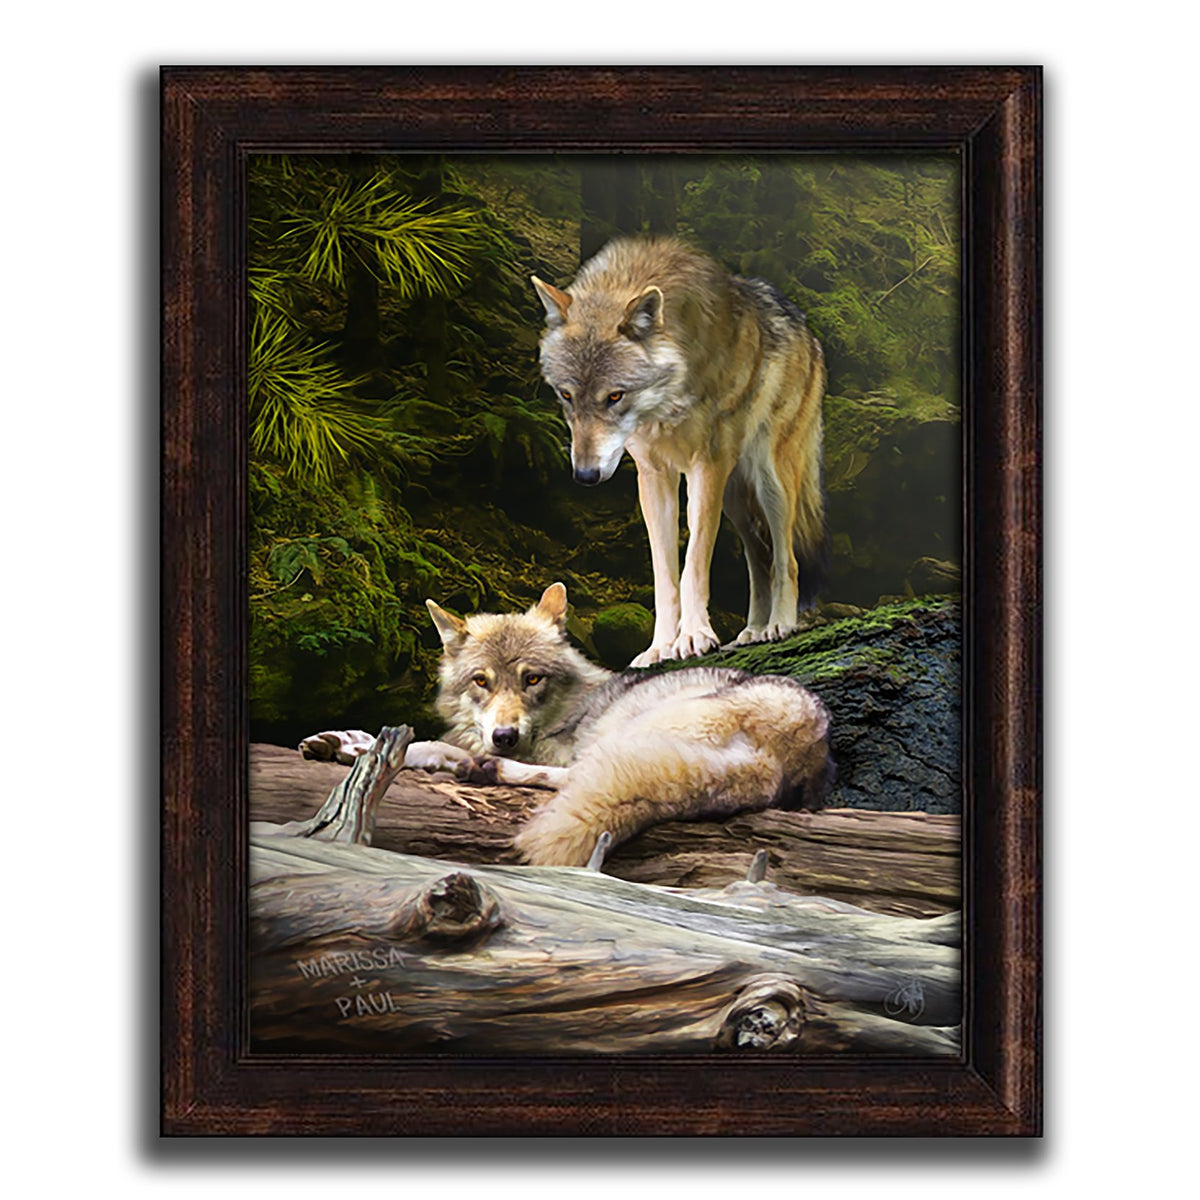 Wildlife decor of a wolf couple next to pine trees- Framed Canvas